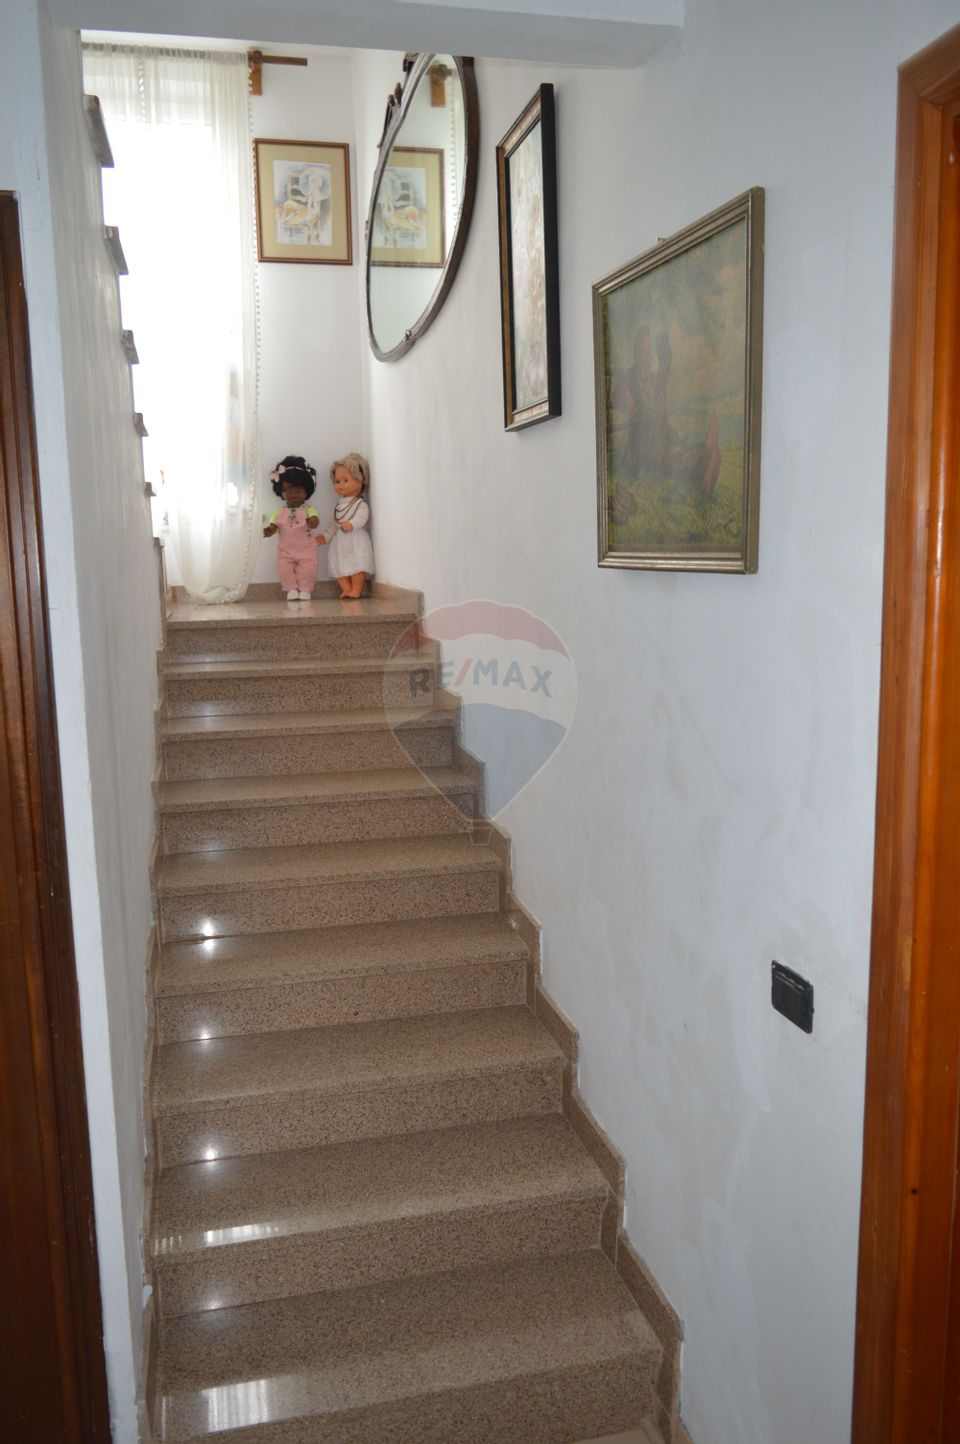 39 room House / Villa for sale, Central area